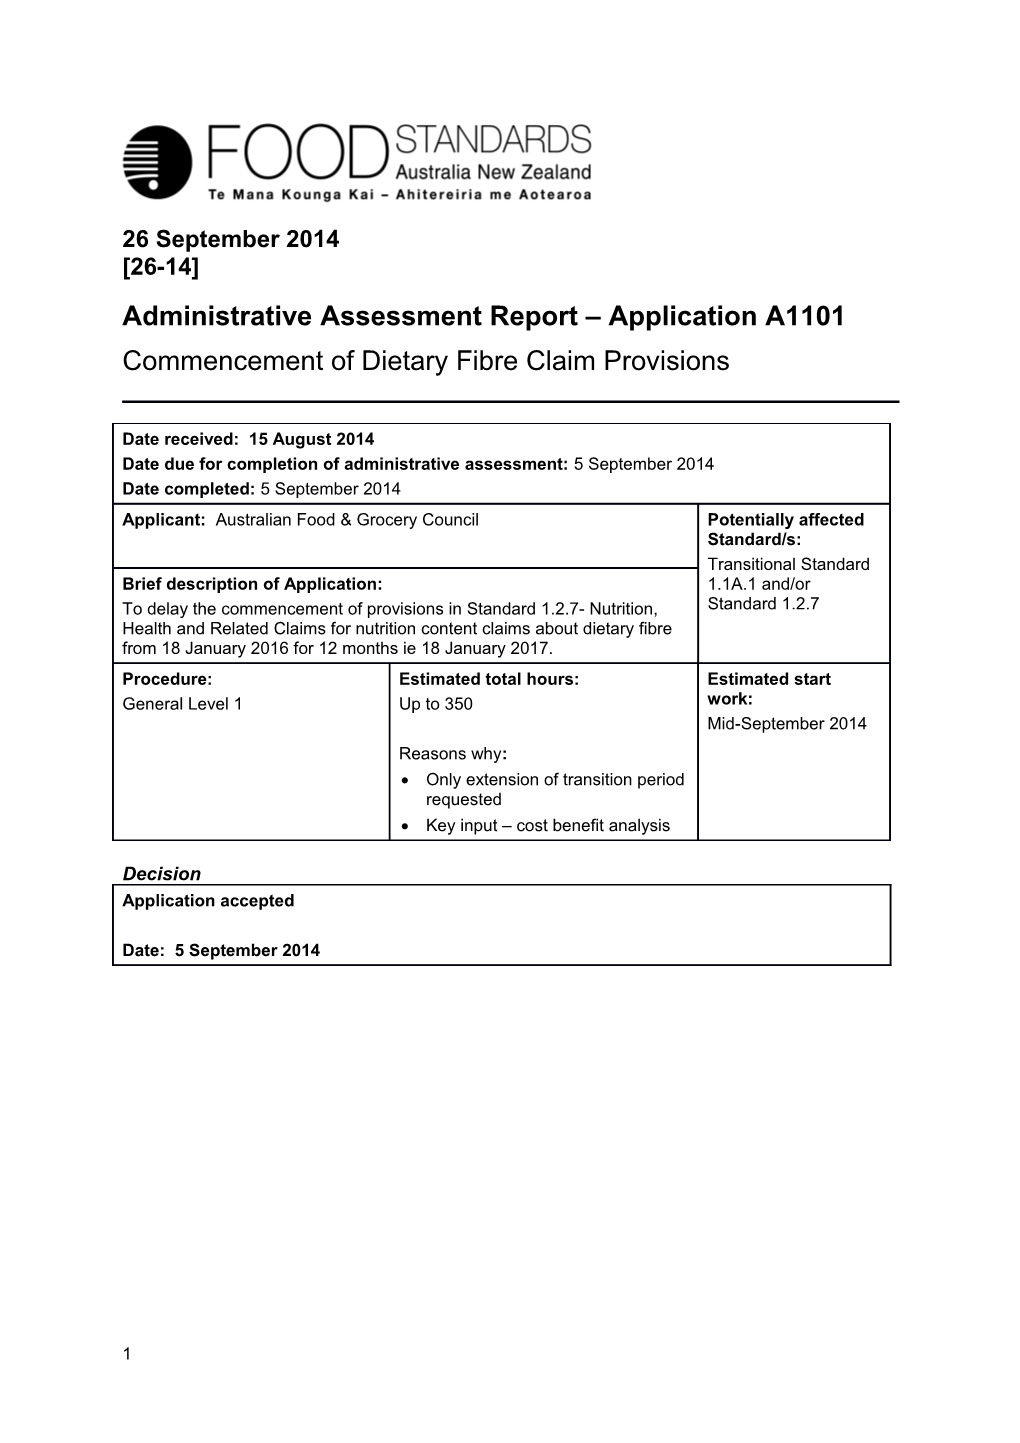 Administrative Assessment Report Application A1101